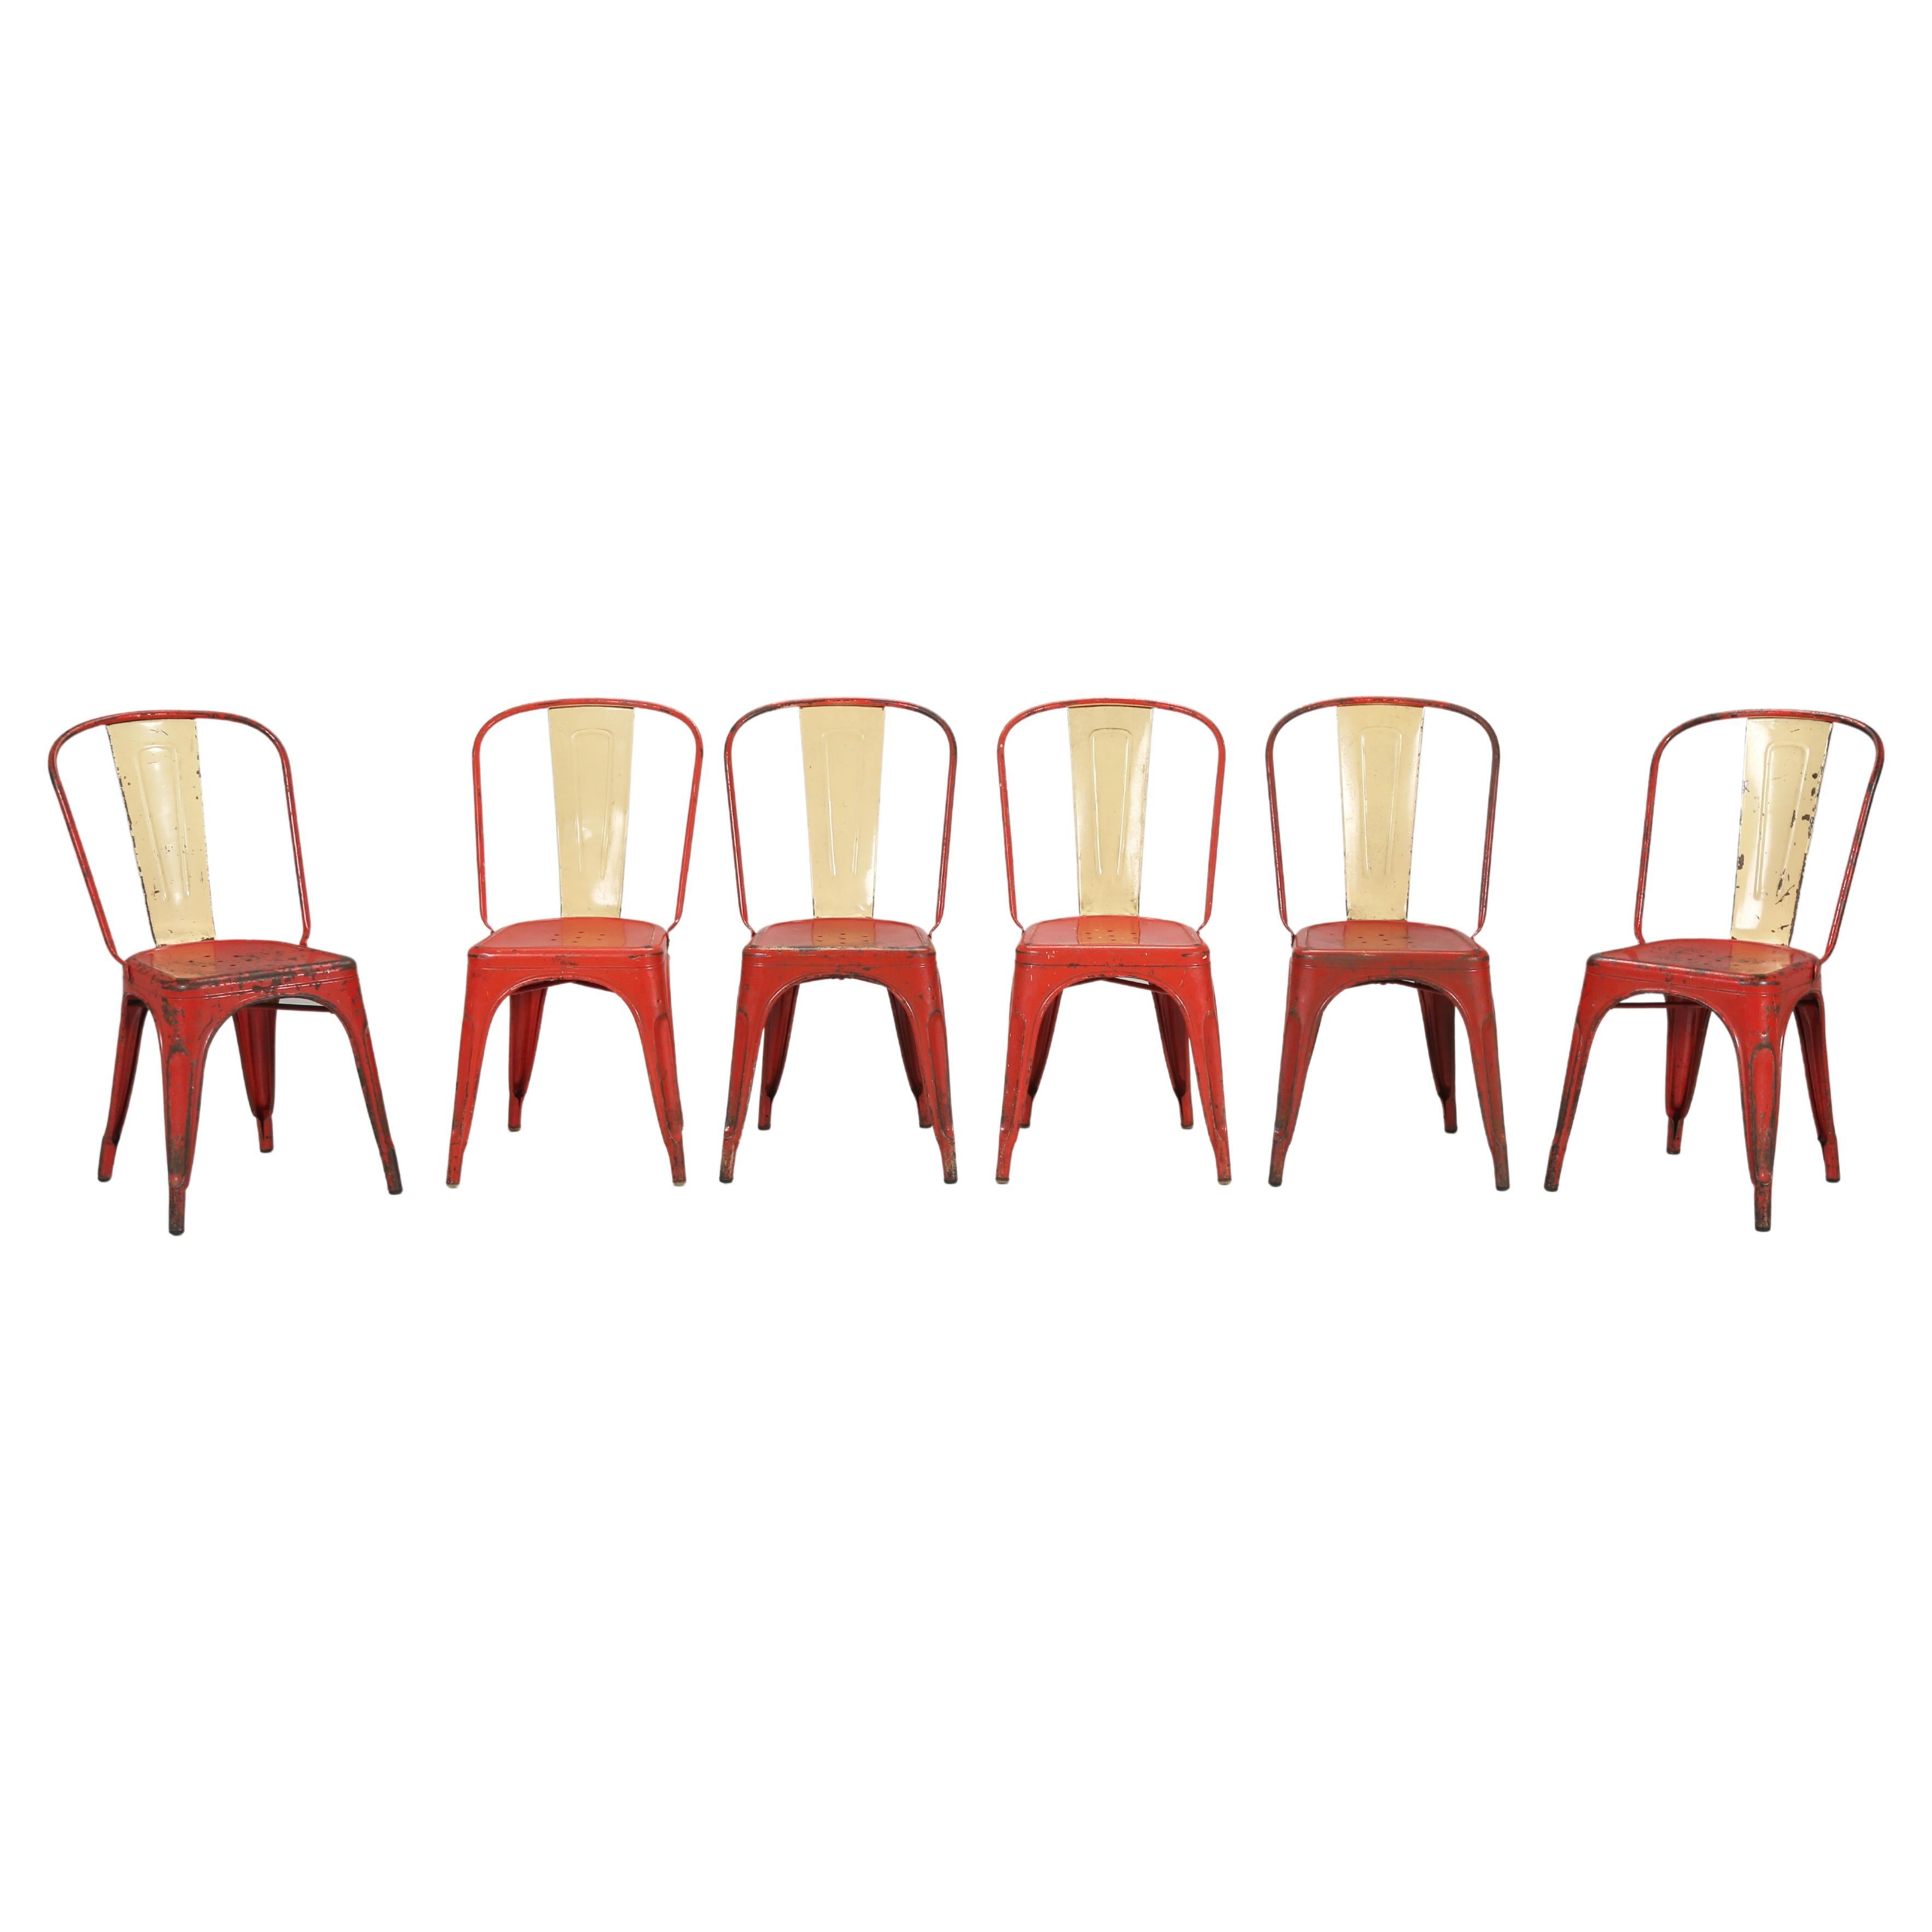 Tolix Chairs 'Authentic' Set of '6' Available Individually or in Sets Up to 100